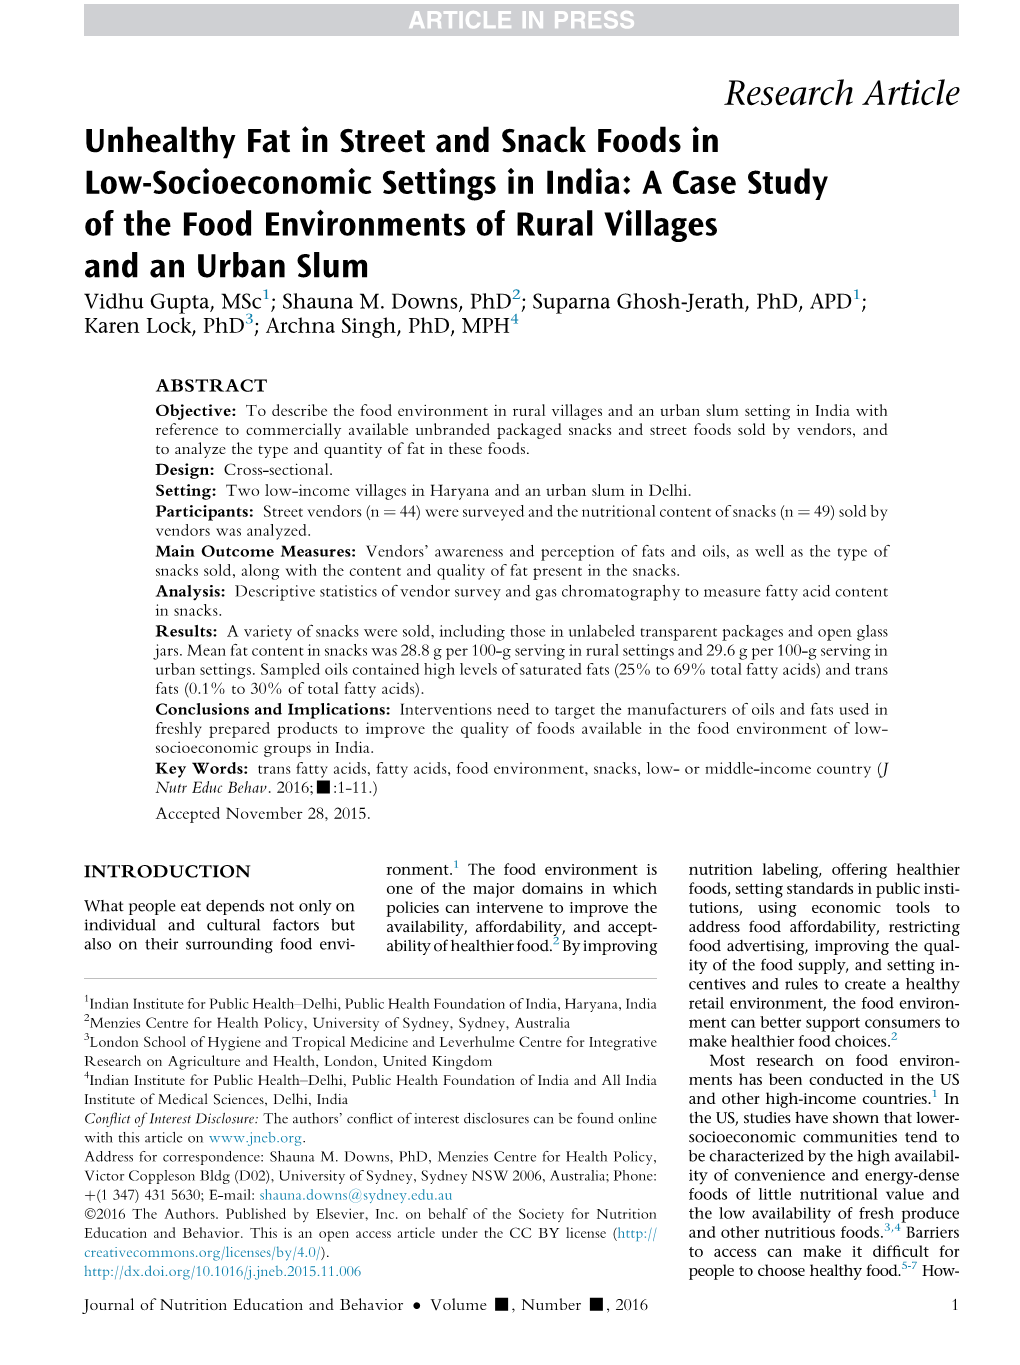 Unhealthy Fat in Street and Snack Foods in Low-Socioeconomic Settings in India